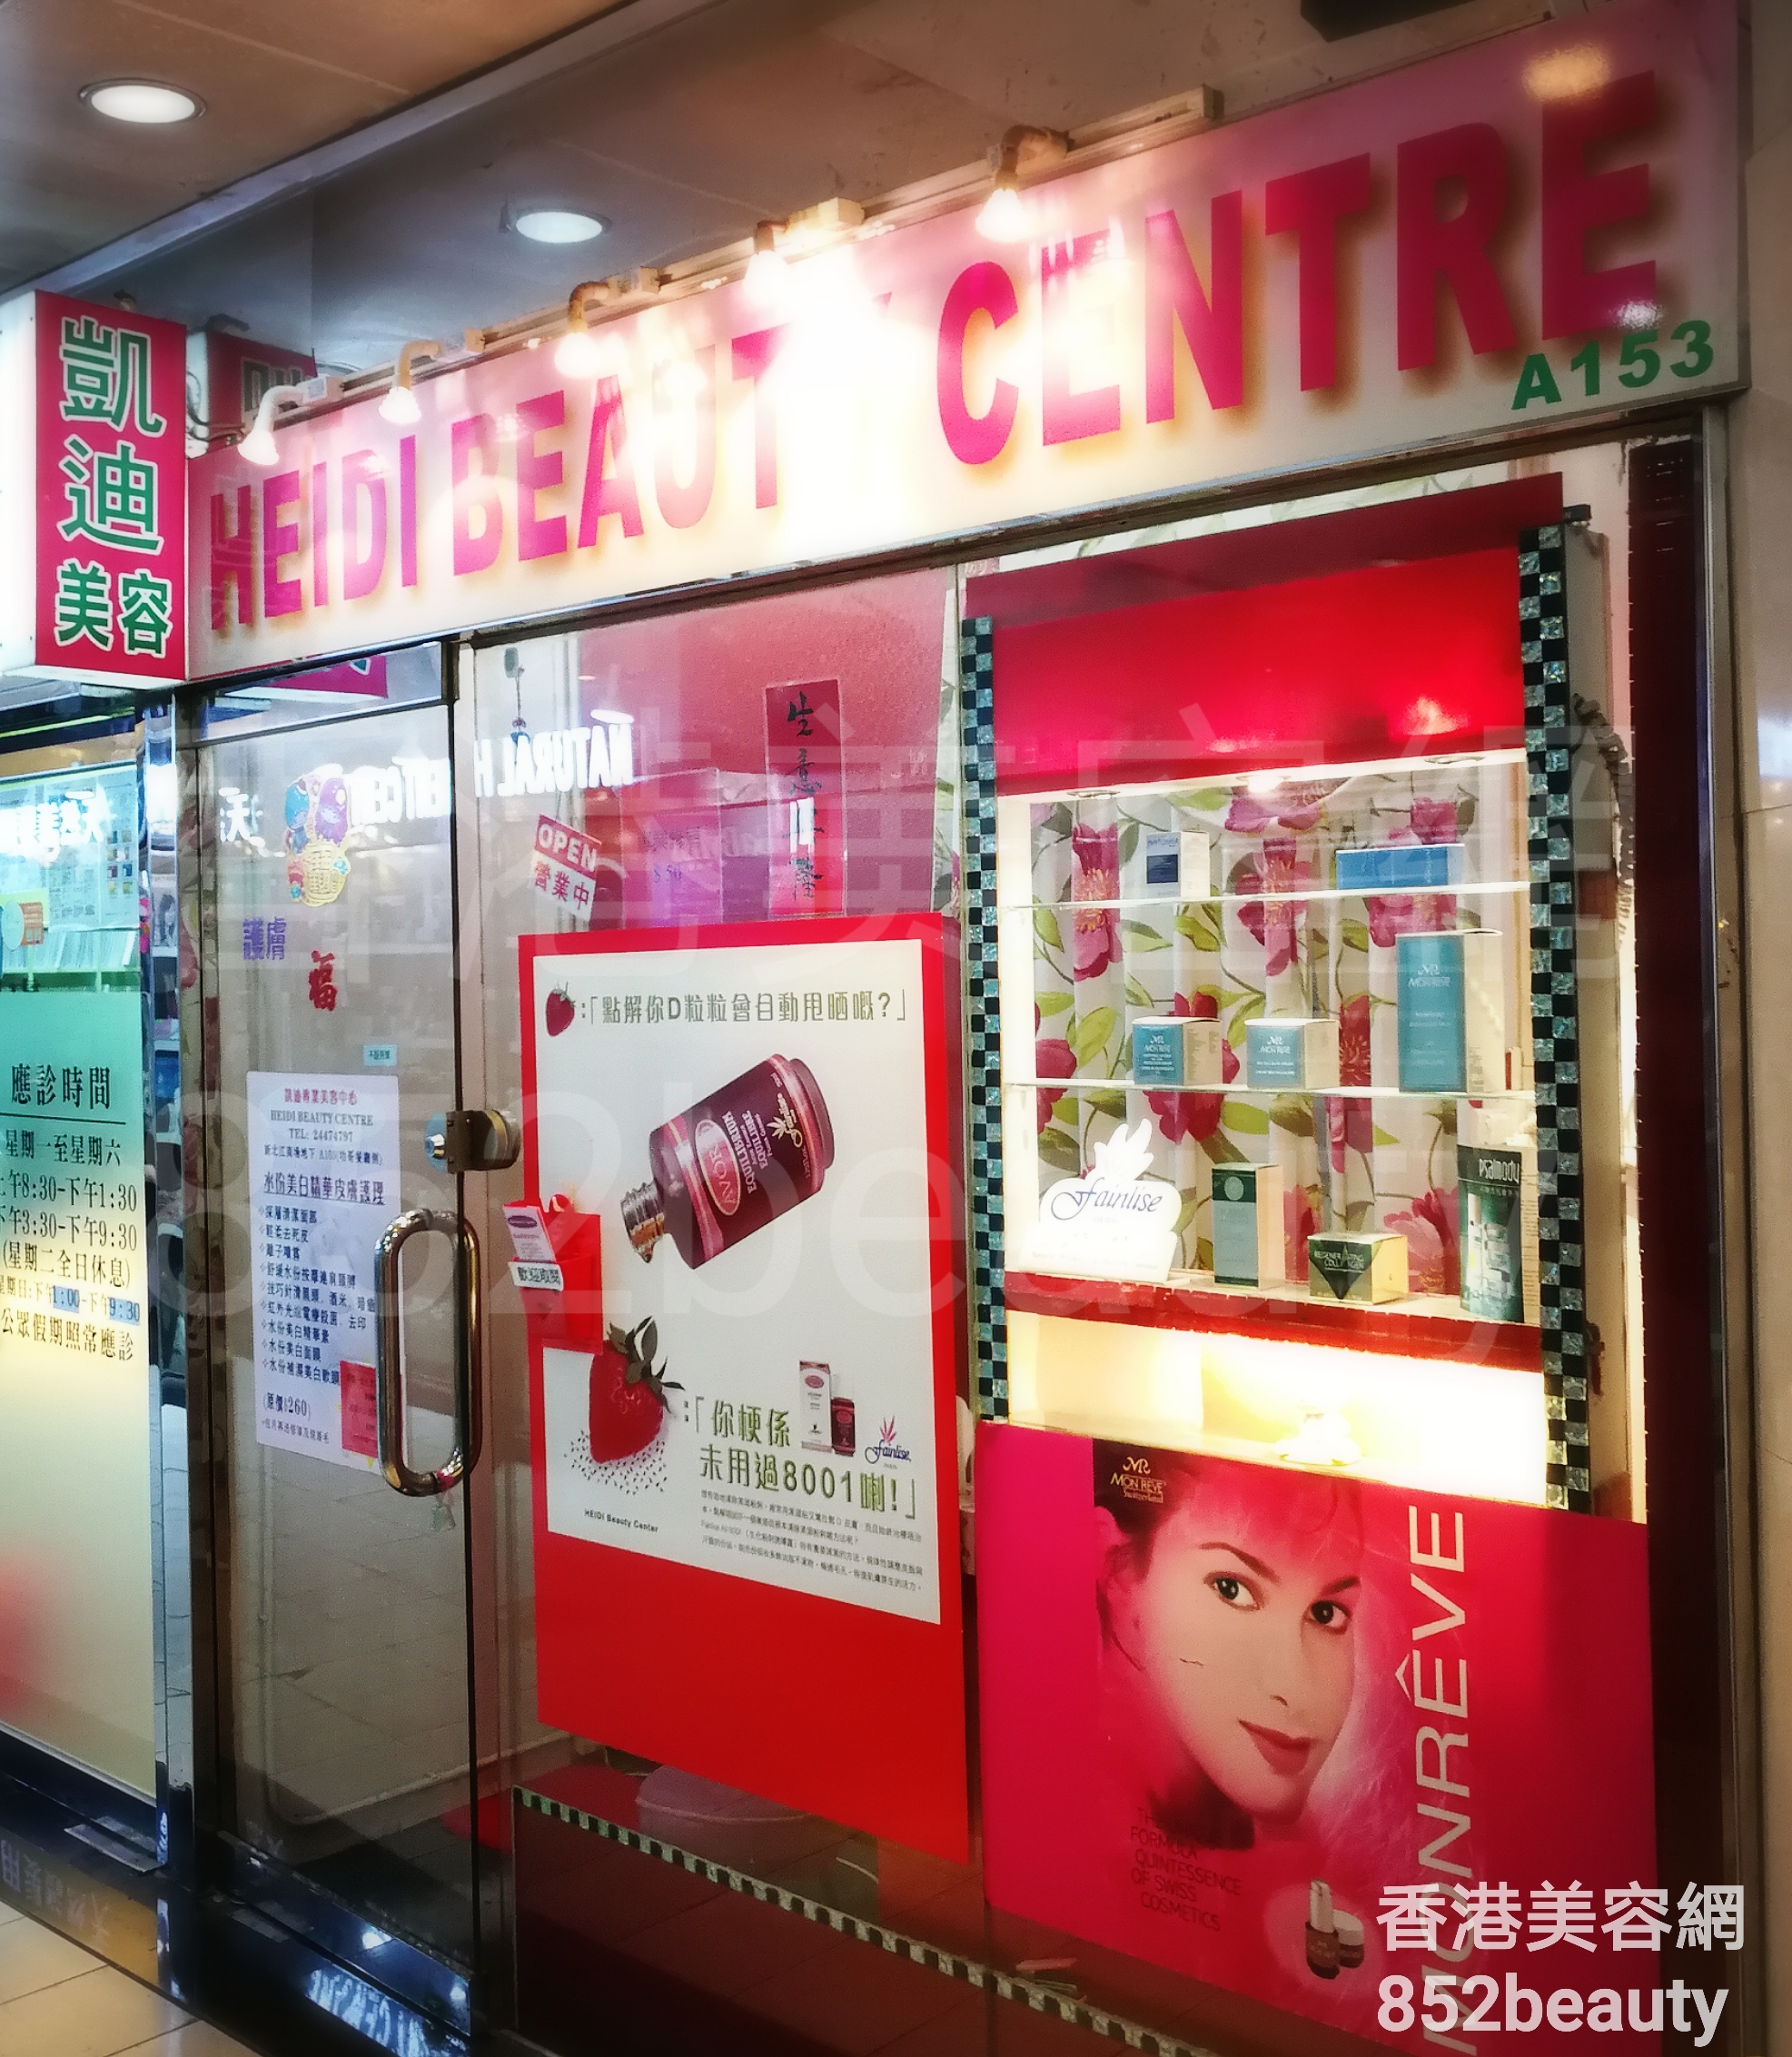 Hand and foot care: 凱迪美容 HEIDI BEAUTY CENTRE